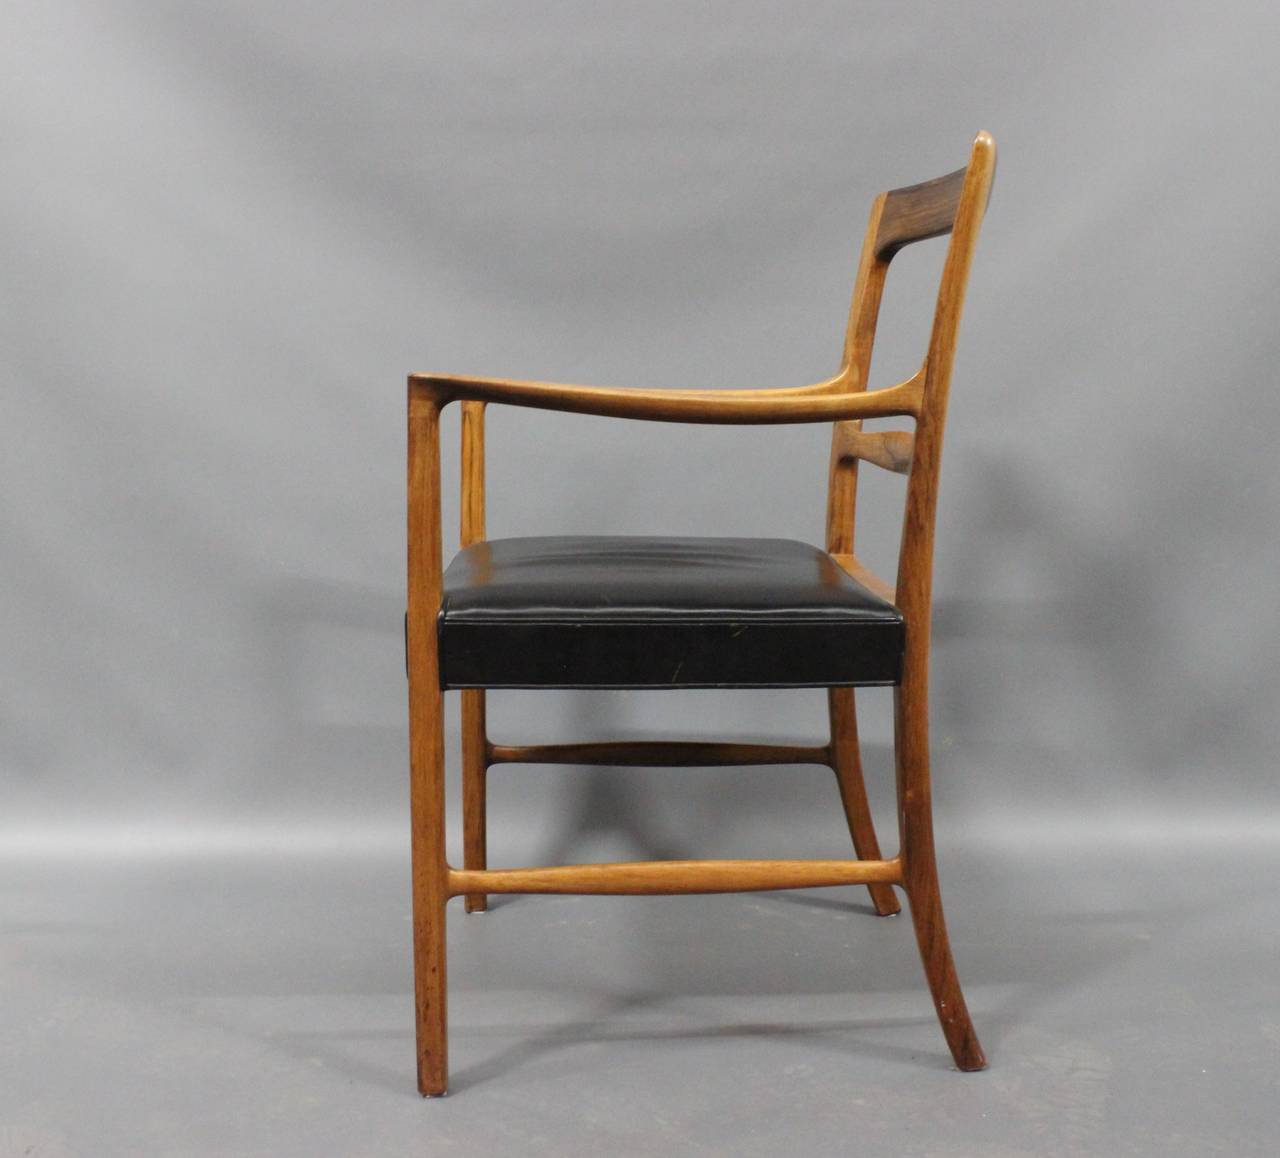 Mid-20th Century Ole Wanscher Armchair, c. 1954 - 1969 in Rosewood